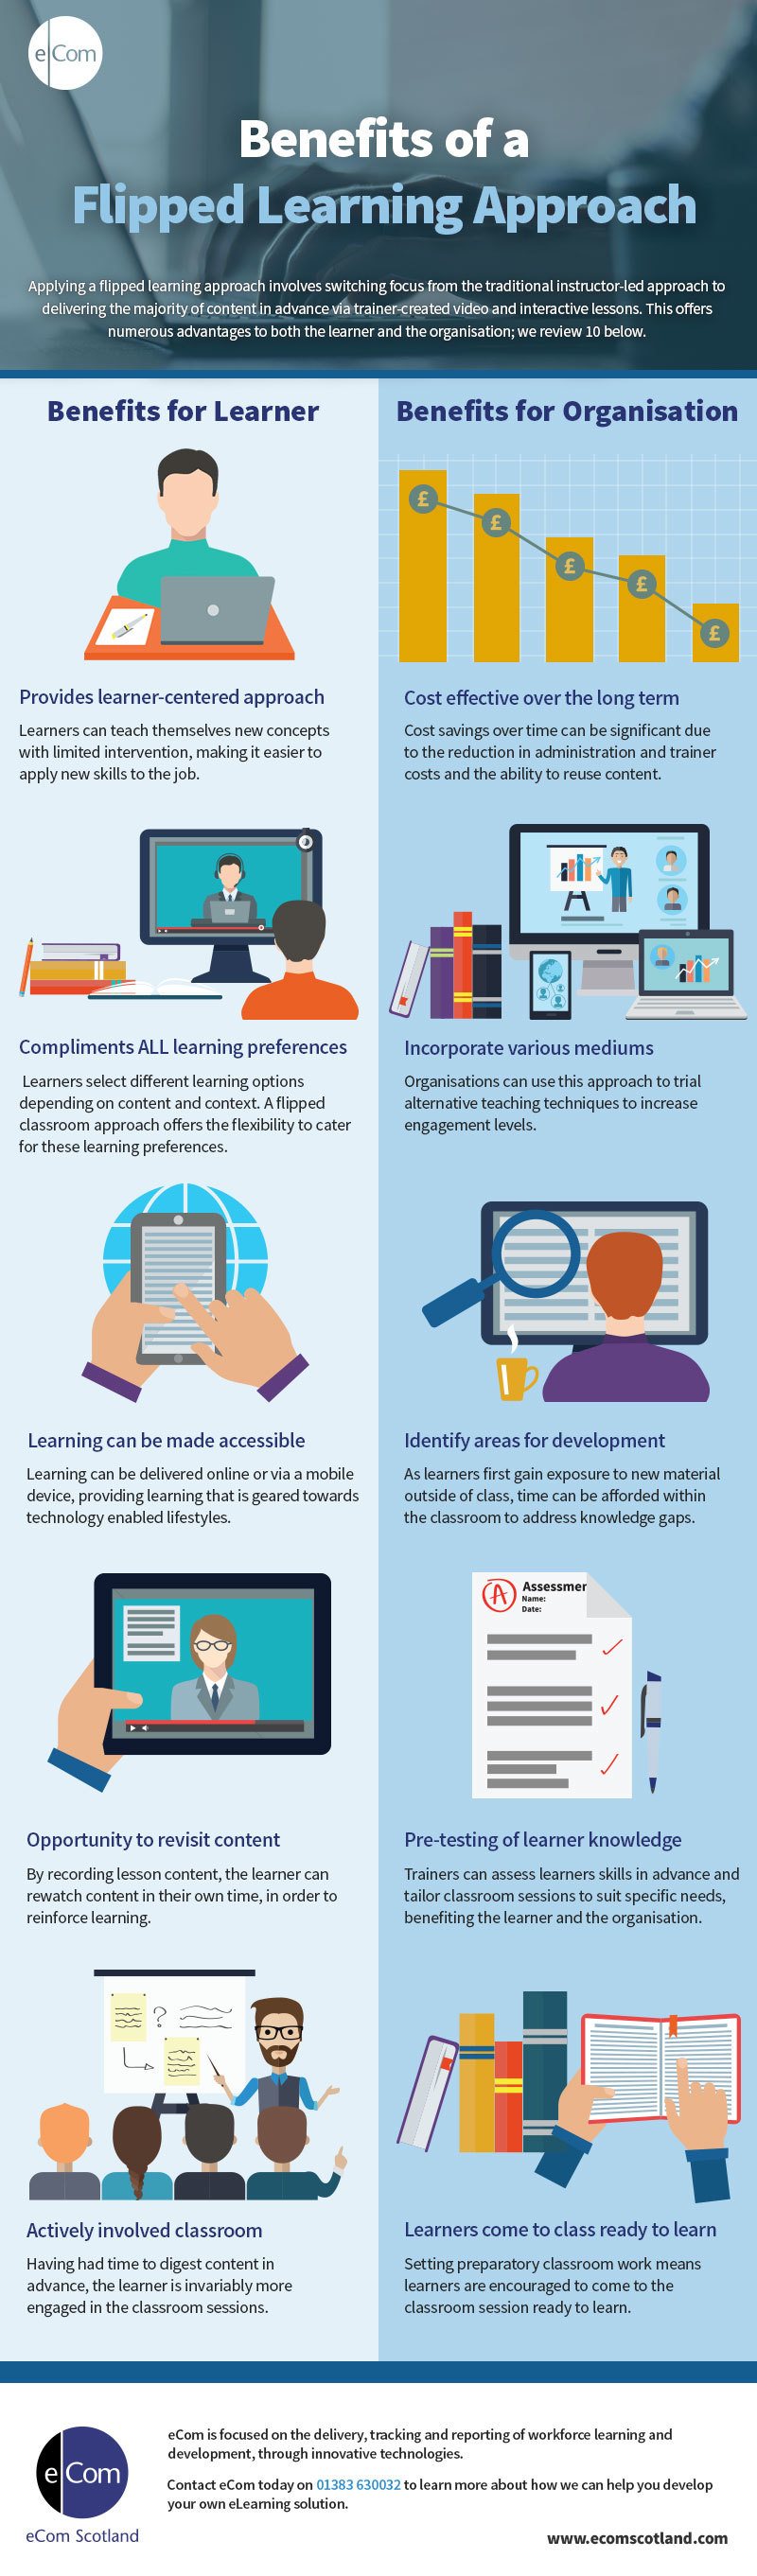 Flipped Learning Approach: Benefits To Learner And Organisation Infographic